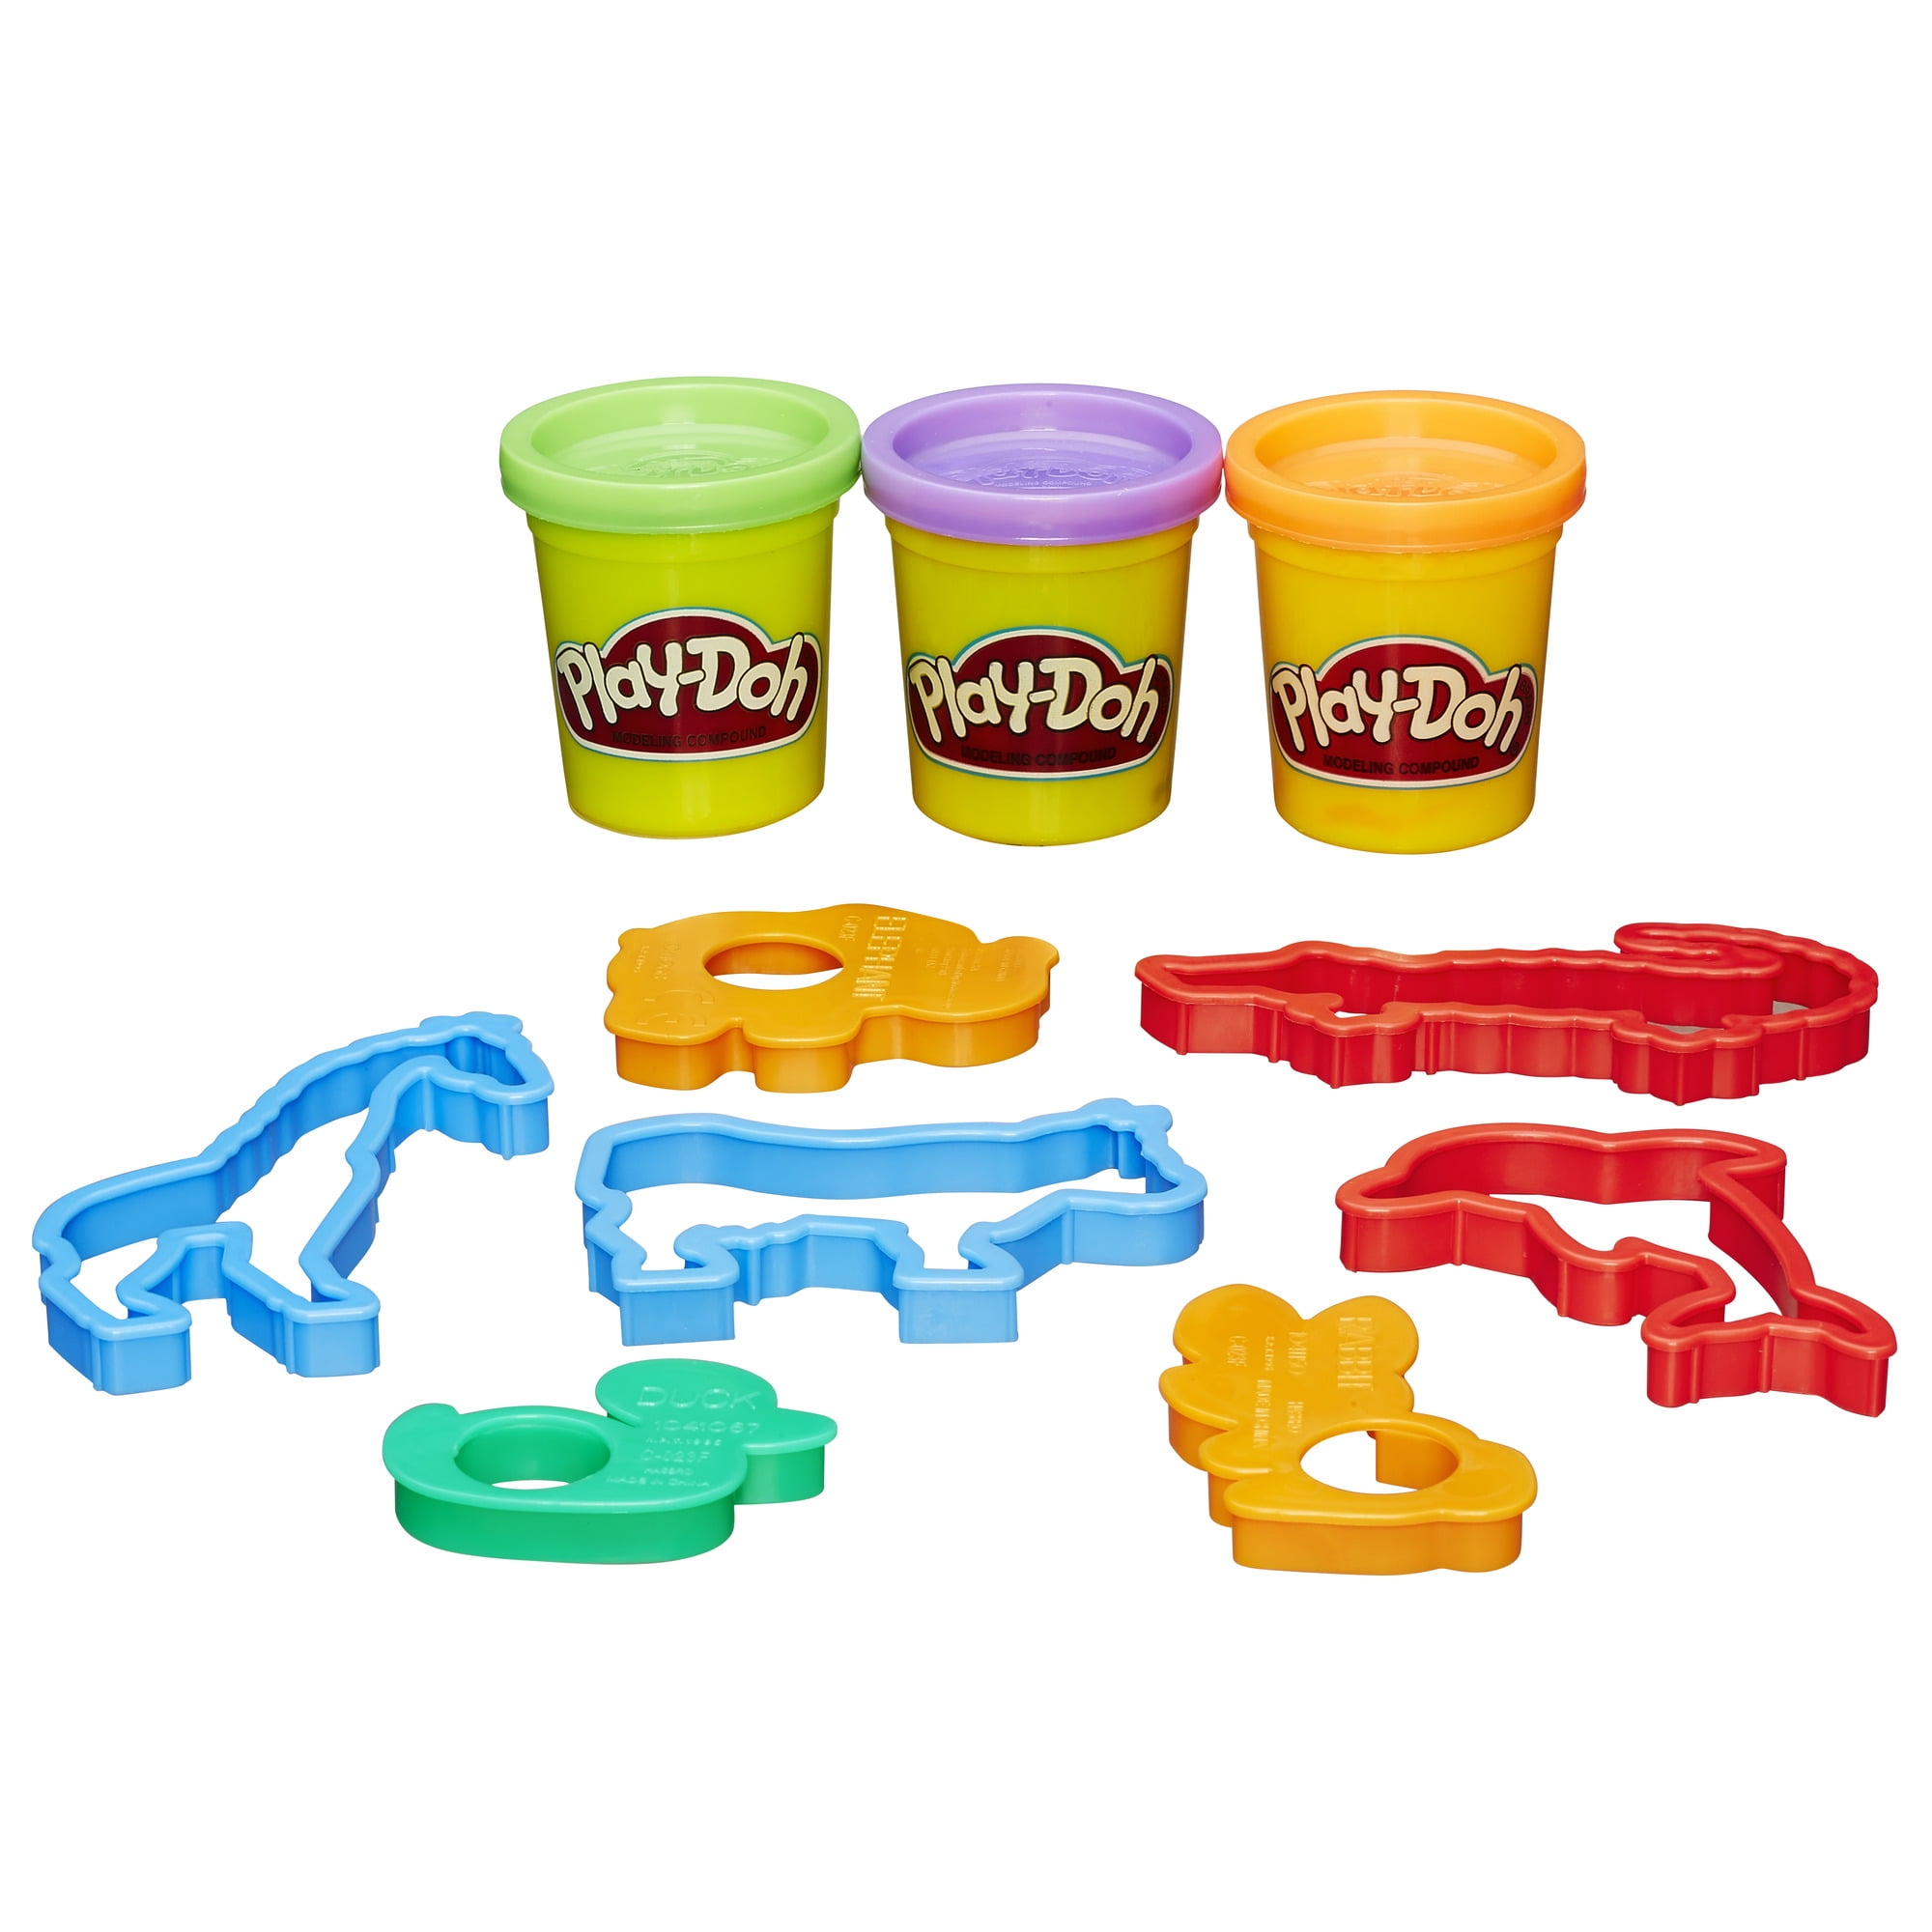 8 Cans-32 Oz Play-Doh HASB5517BAMZ 4-Pack of Colors Gift Set Bundle 